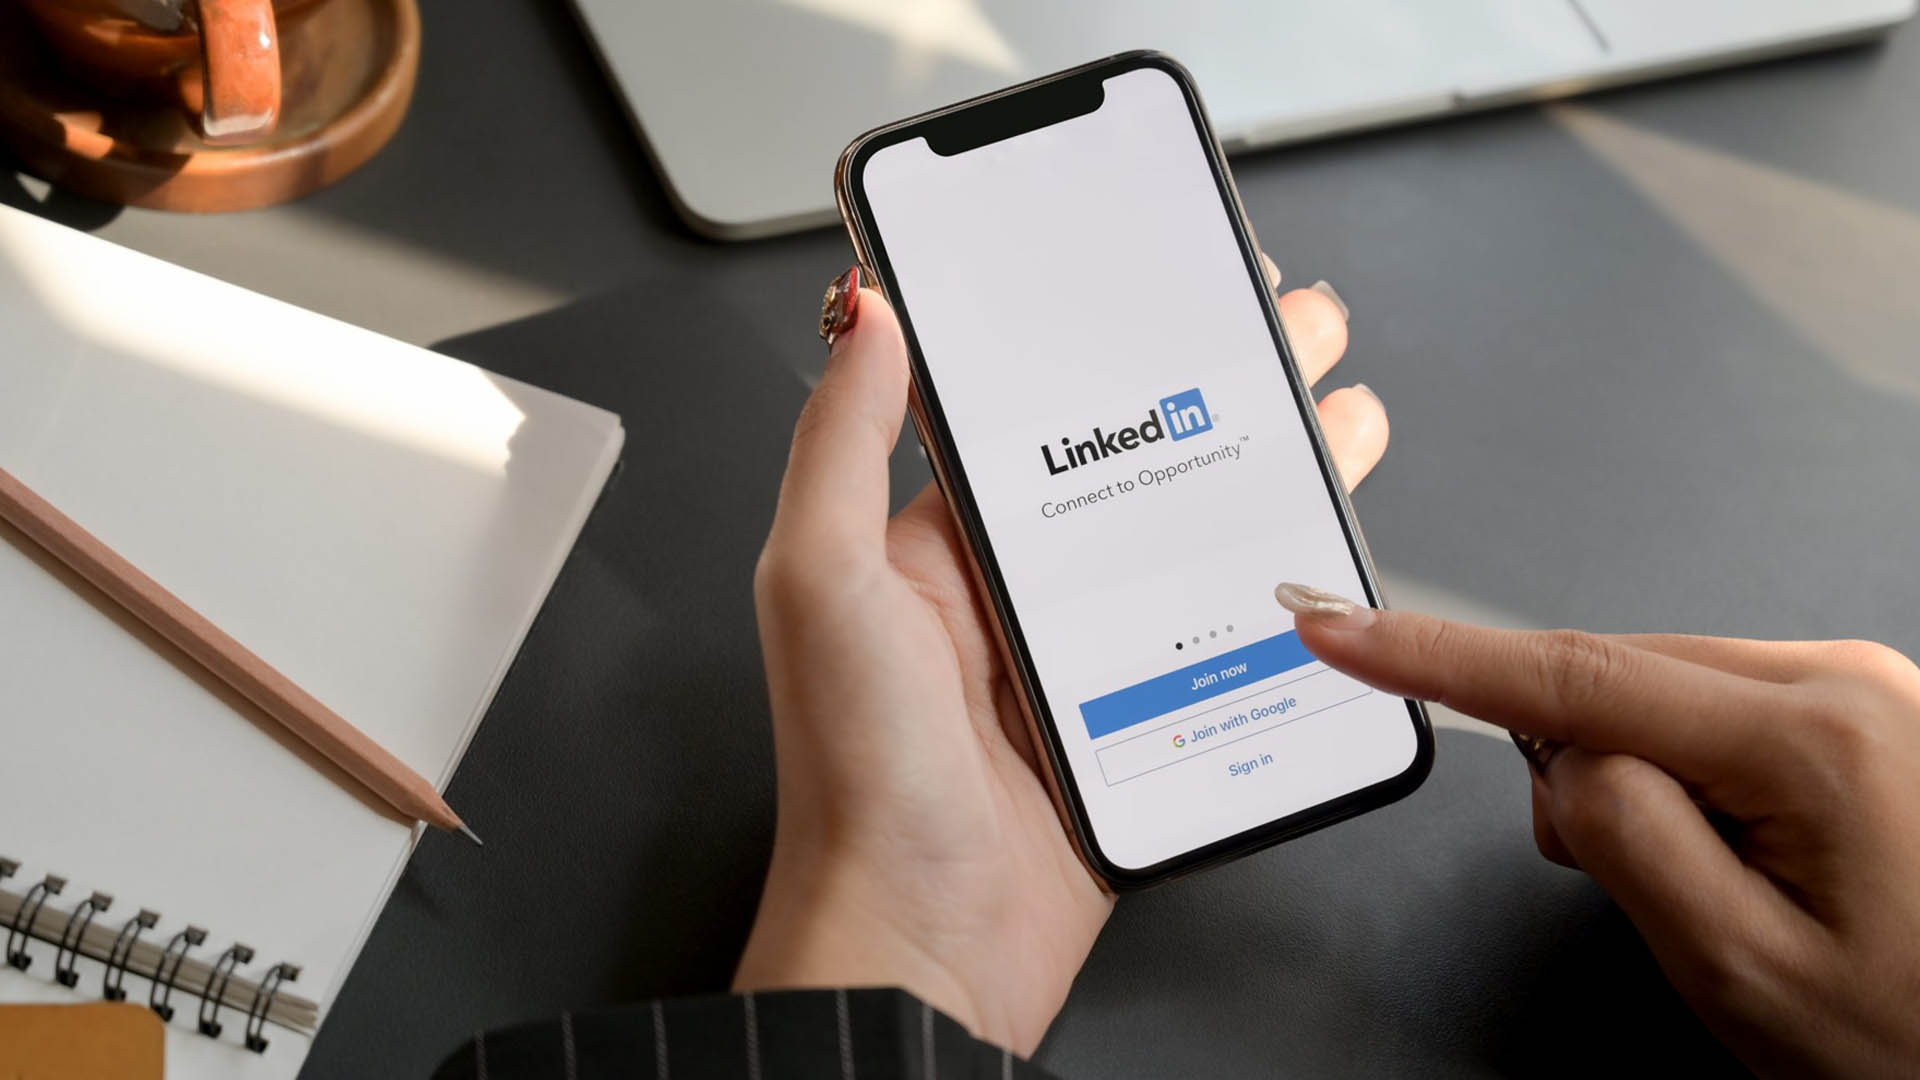 LinkedIn touches 1 billion members mark and adds AI features